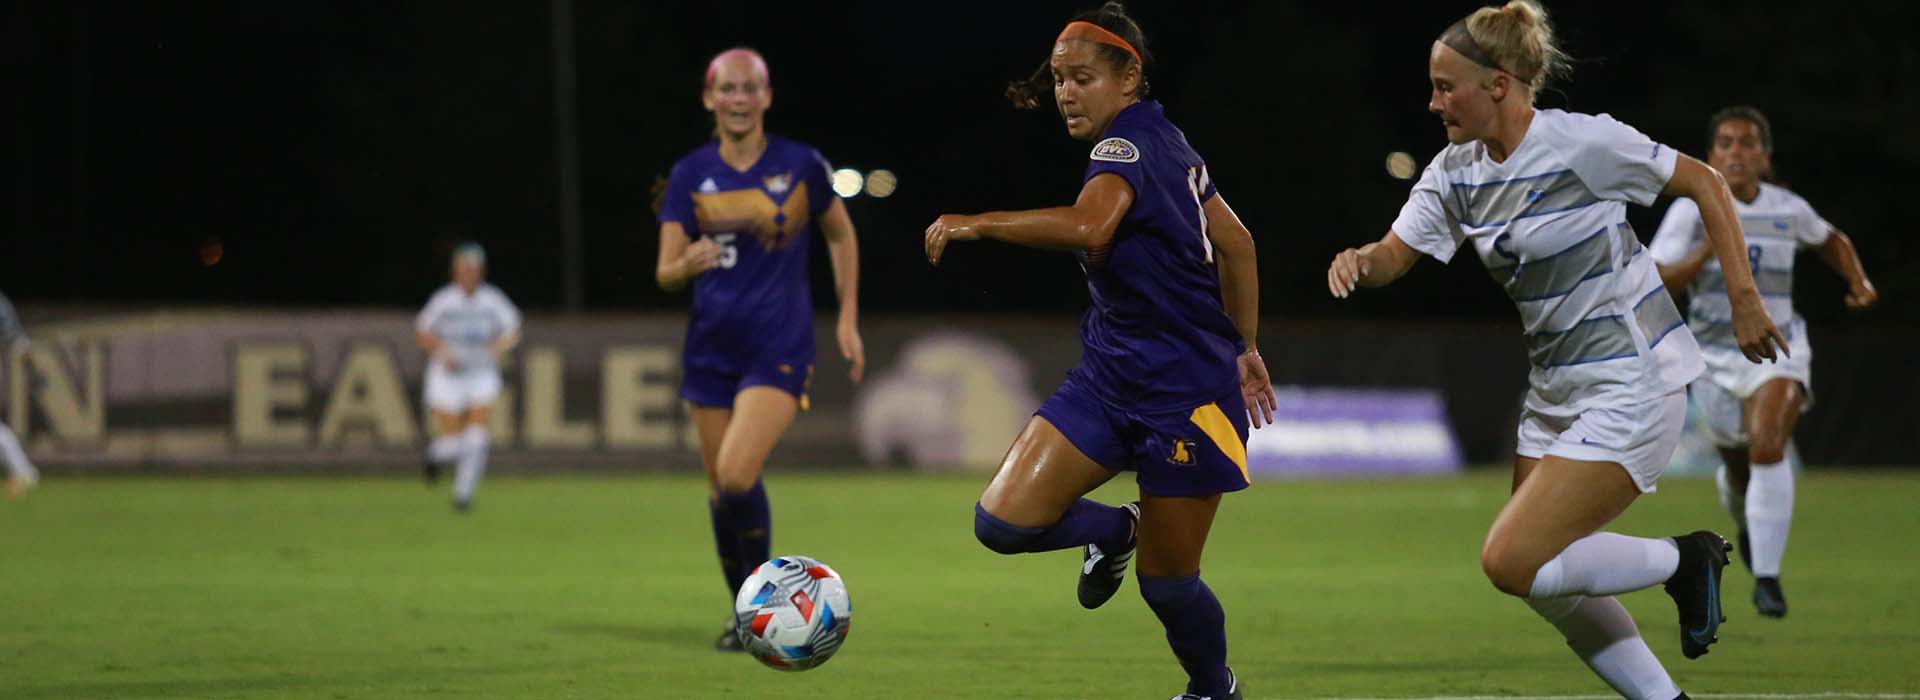 Garcia’s dramatic double overtime goal lifts Golden Eagles to first OVC win of the season